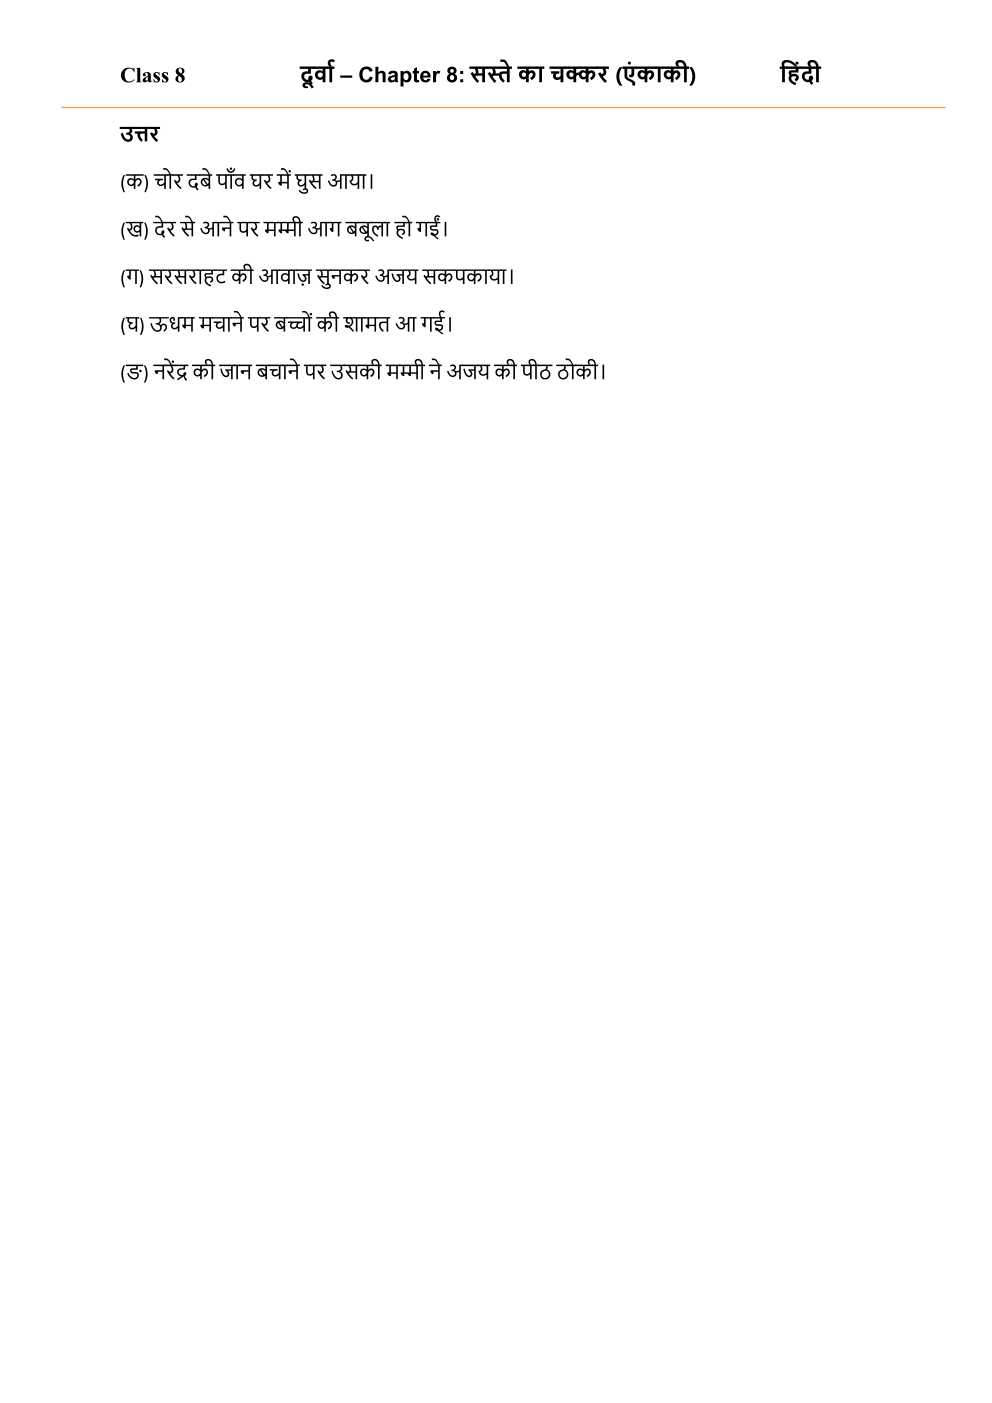 NCERT Solutions For Class 8 Hindi Durva Chapter 8